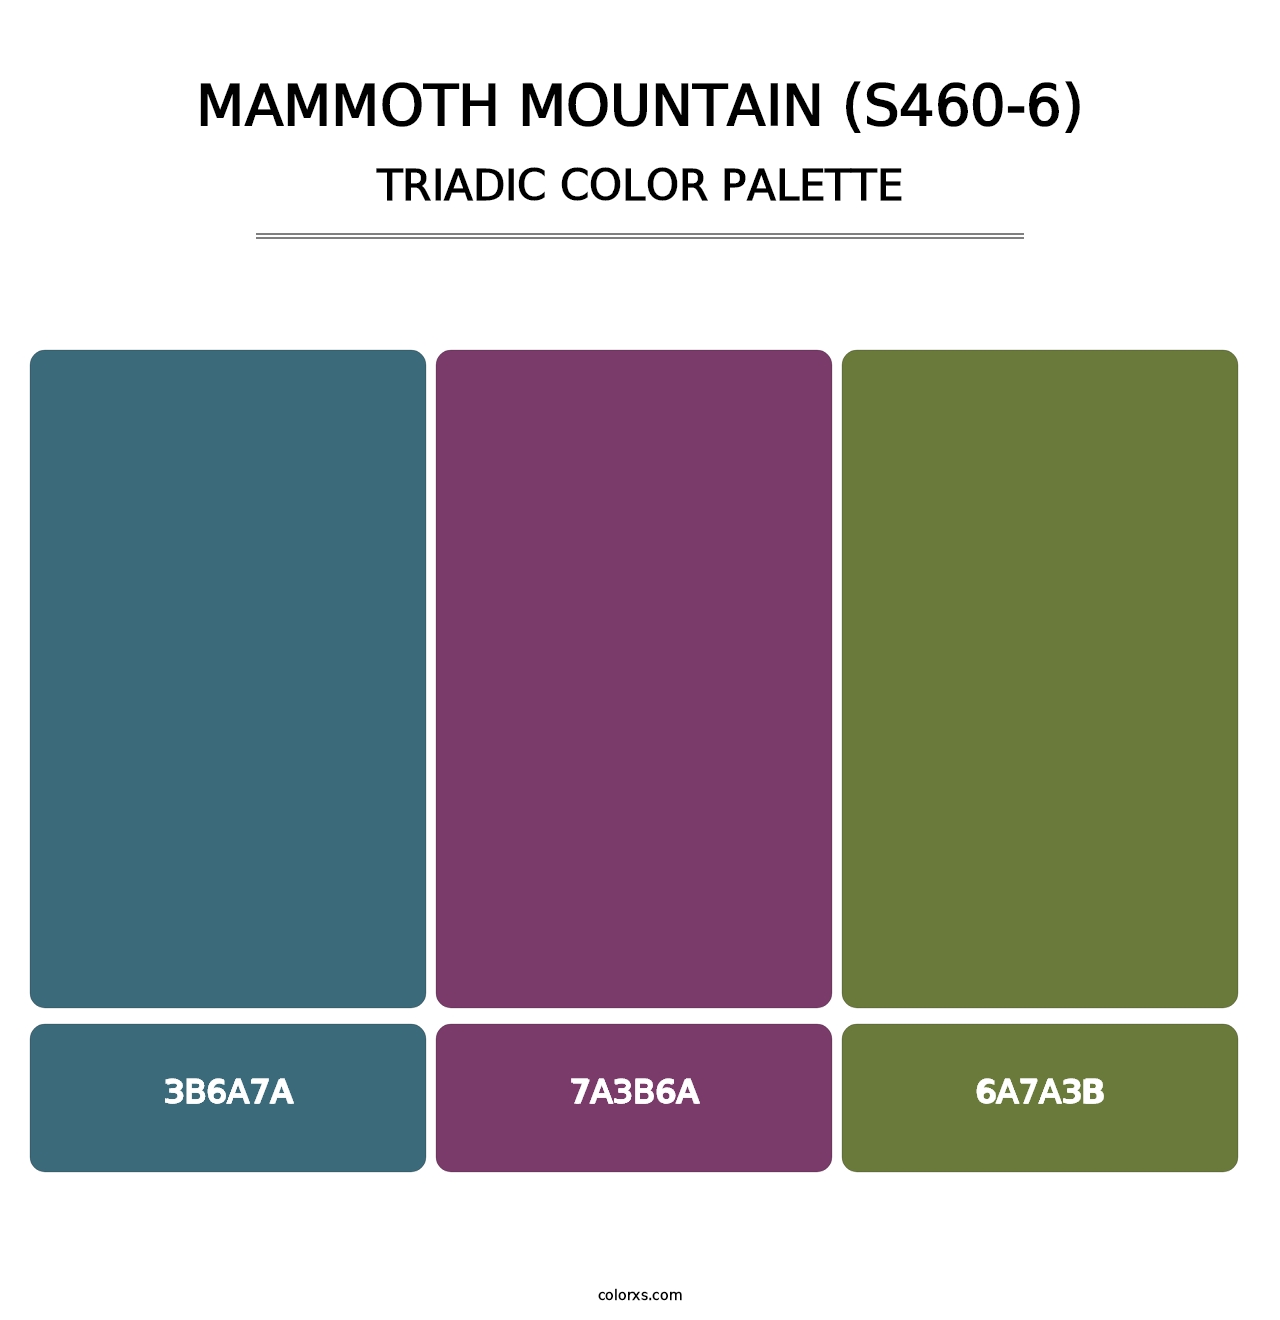 Mammoth Mountain (S460-6) - Triadic Color Palette